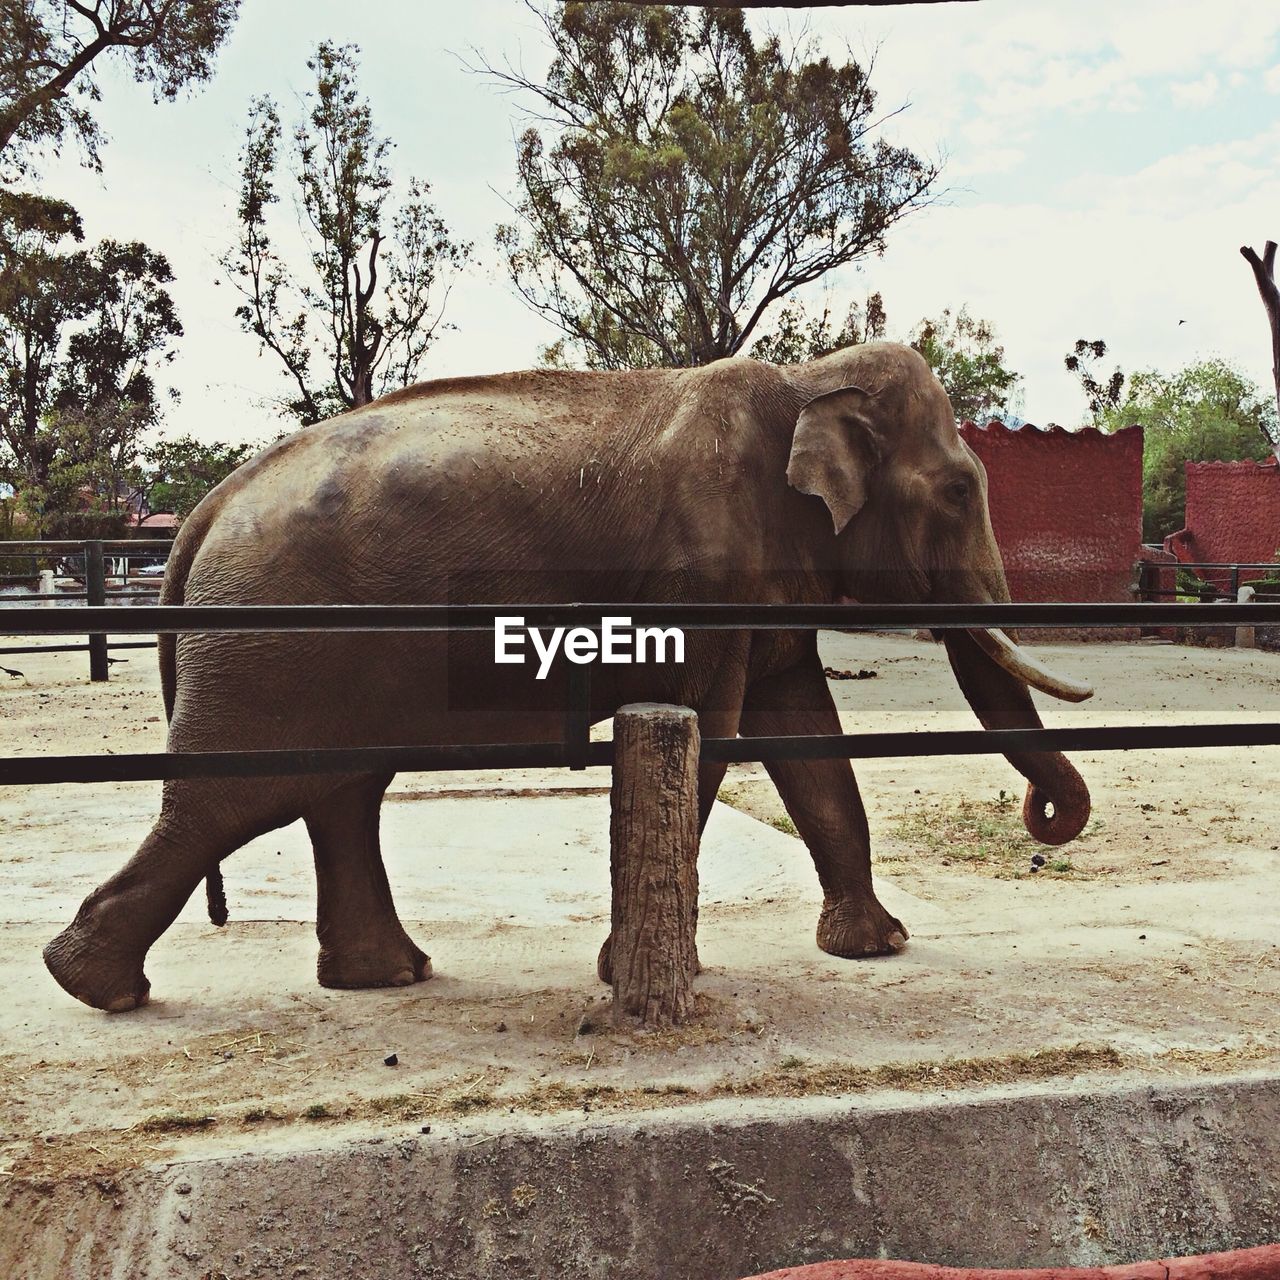 Elephant in stable